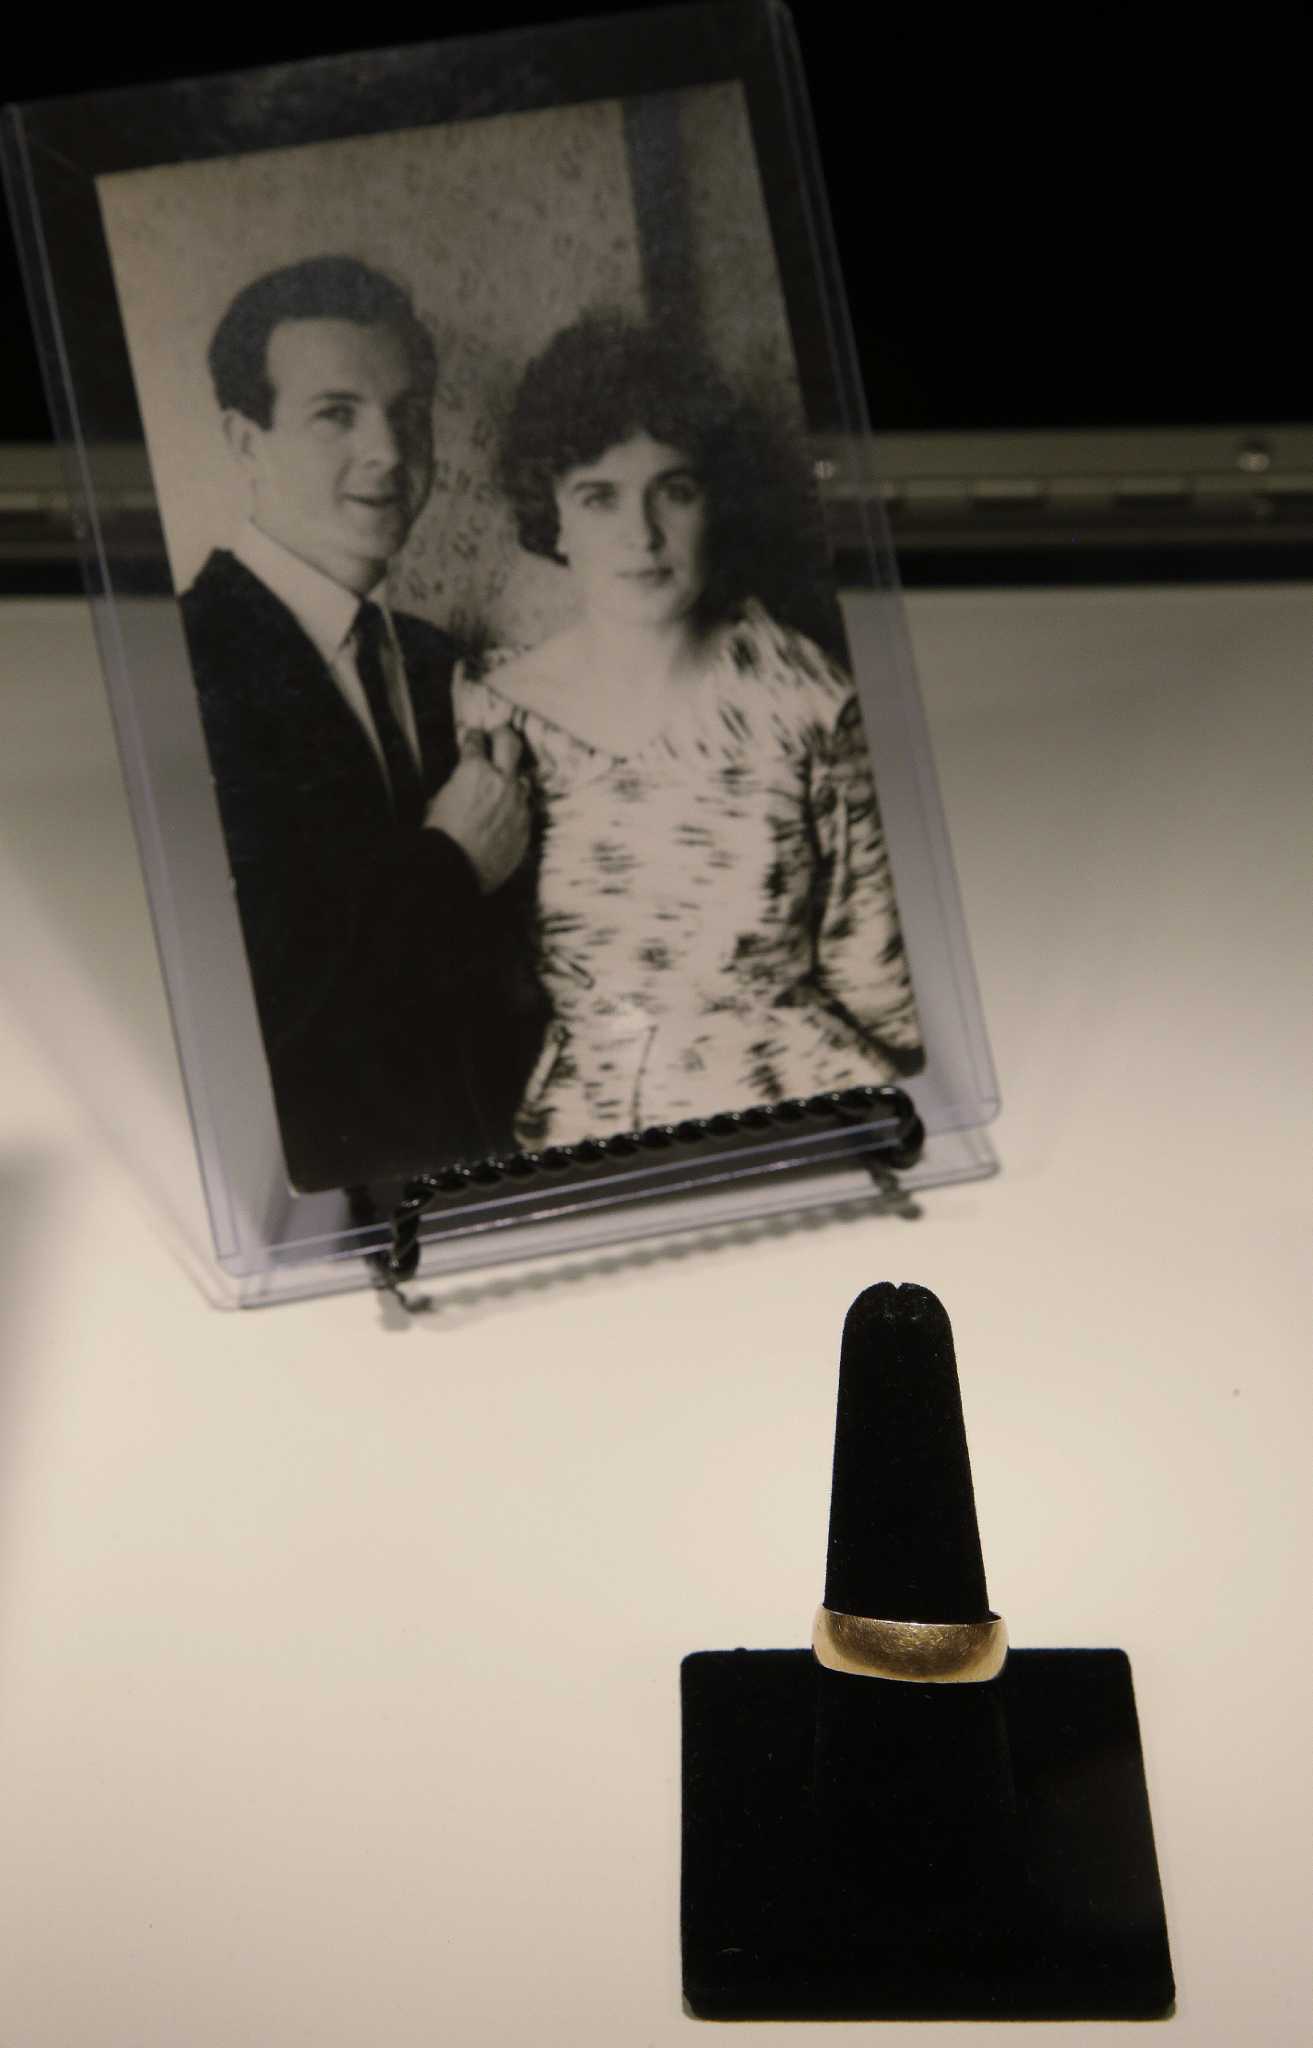 Oswald Wedding Ring Sells For 108 000 At Auction